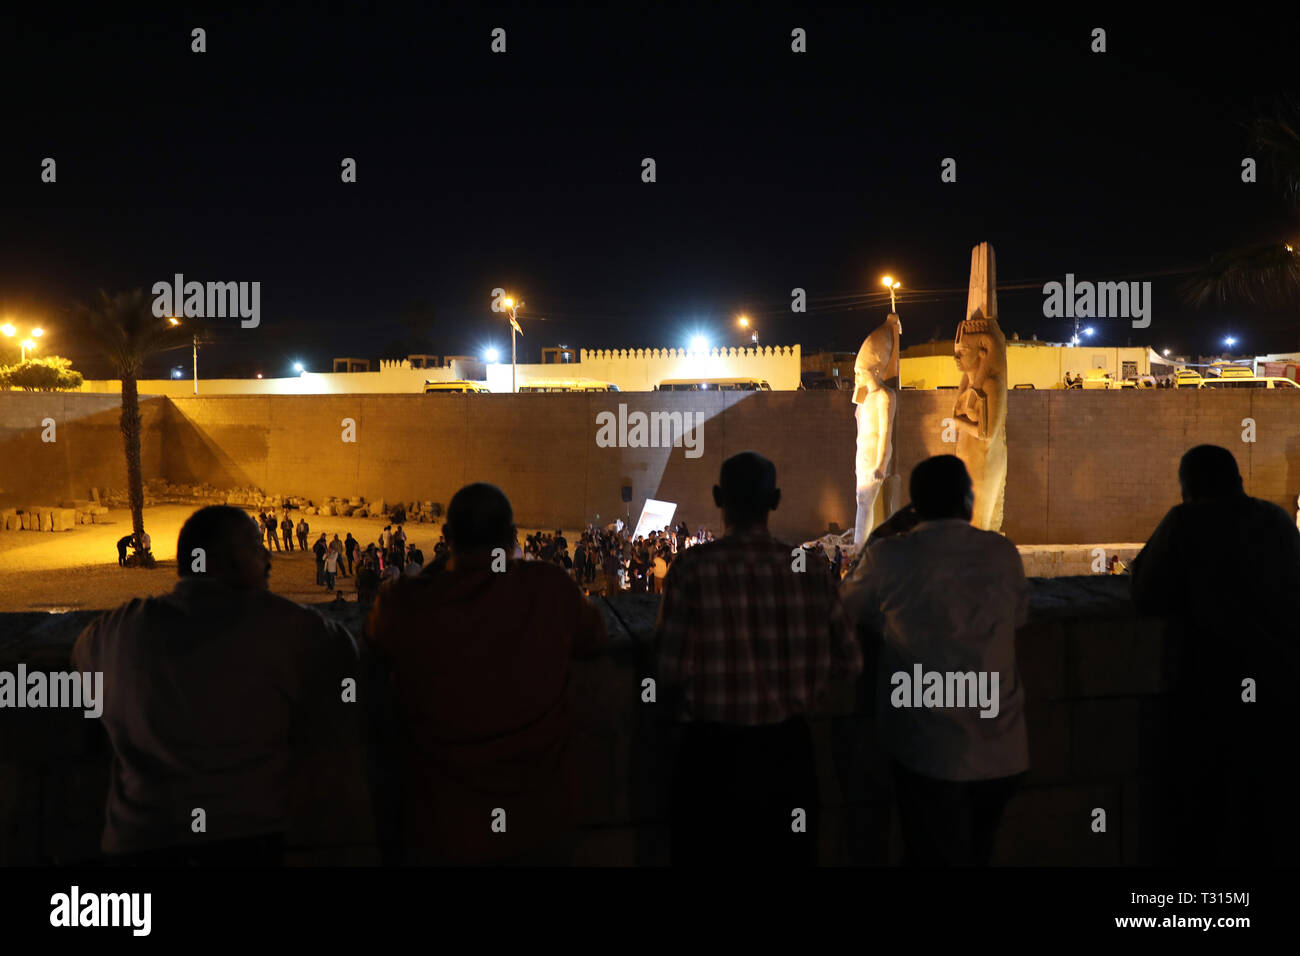 Sohag, Egypt. 5th Apr, 2019. People view a revived statue of Ramses II in Sohag, Egypt, April 5, 2019. Egyptian archeologists have pieced on Friday 70 fragments to revive a large statue of Ramses II in the upper Egypt's province of Sohag. Ramses II was the third pharaoh of the Nineteenth Dynasty of Egypt and was considered the strongest pharaoh of the New Kingdom that spans from the 16th century BC to the 11th century BC. Credit: Ahmed Gomaa/Xinhua/Alamy Live News Stock Photo